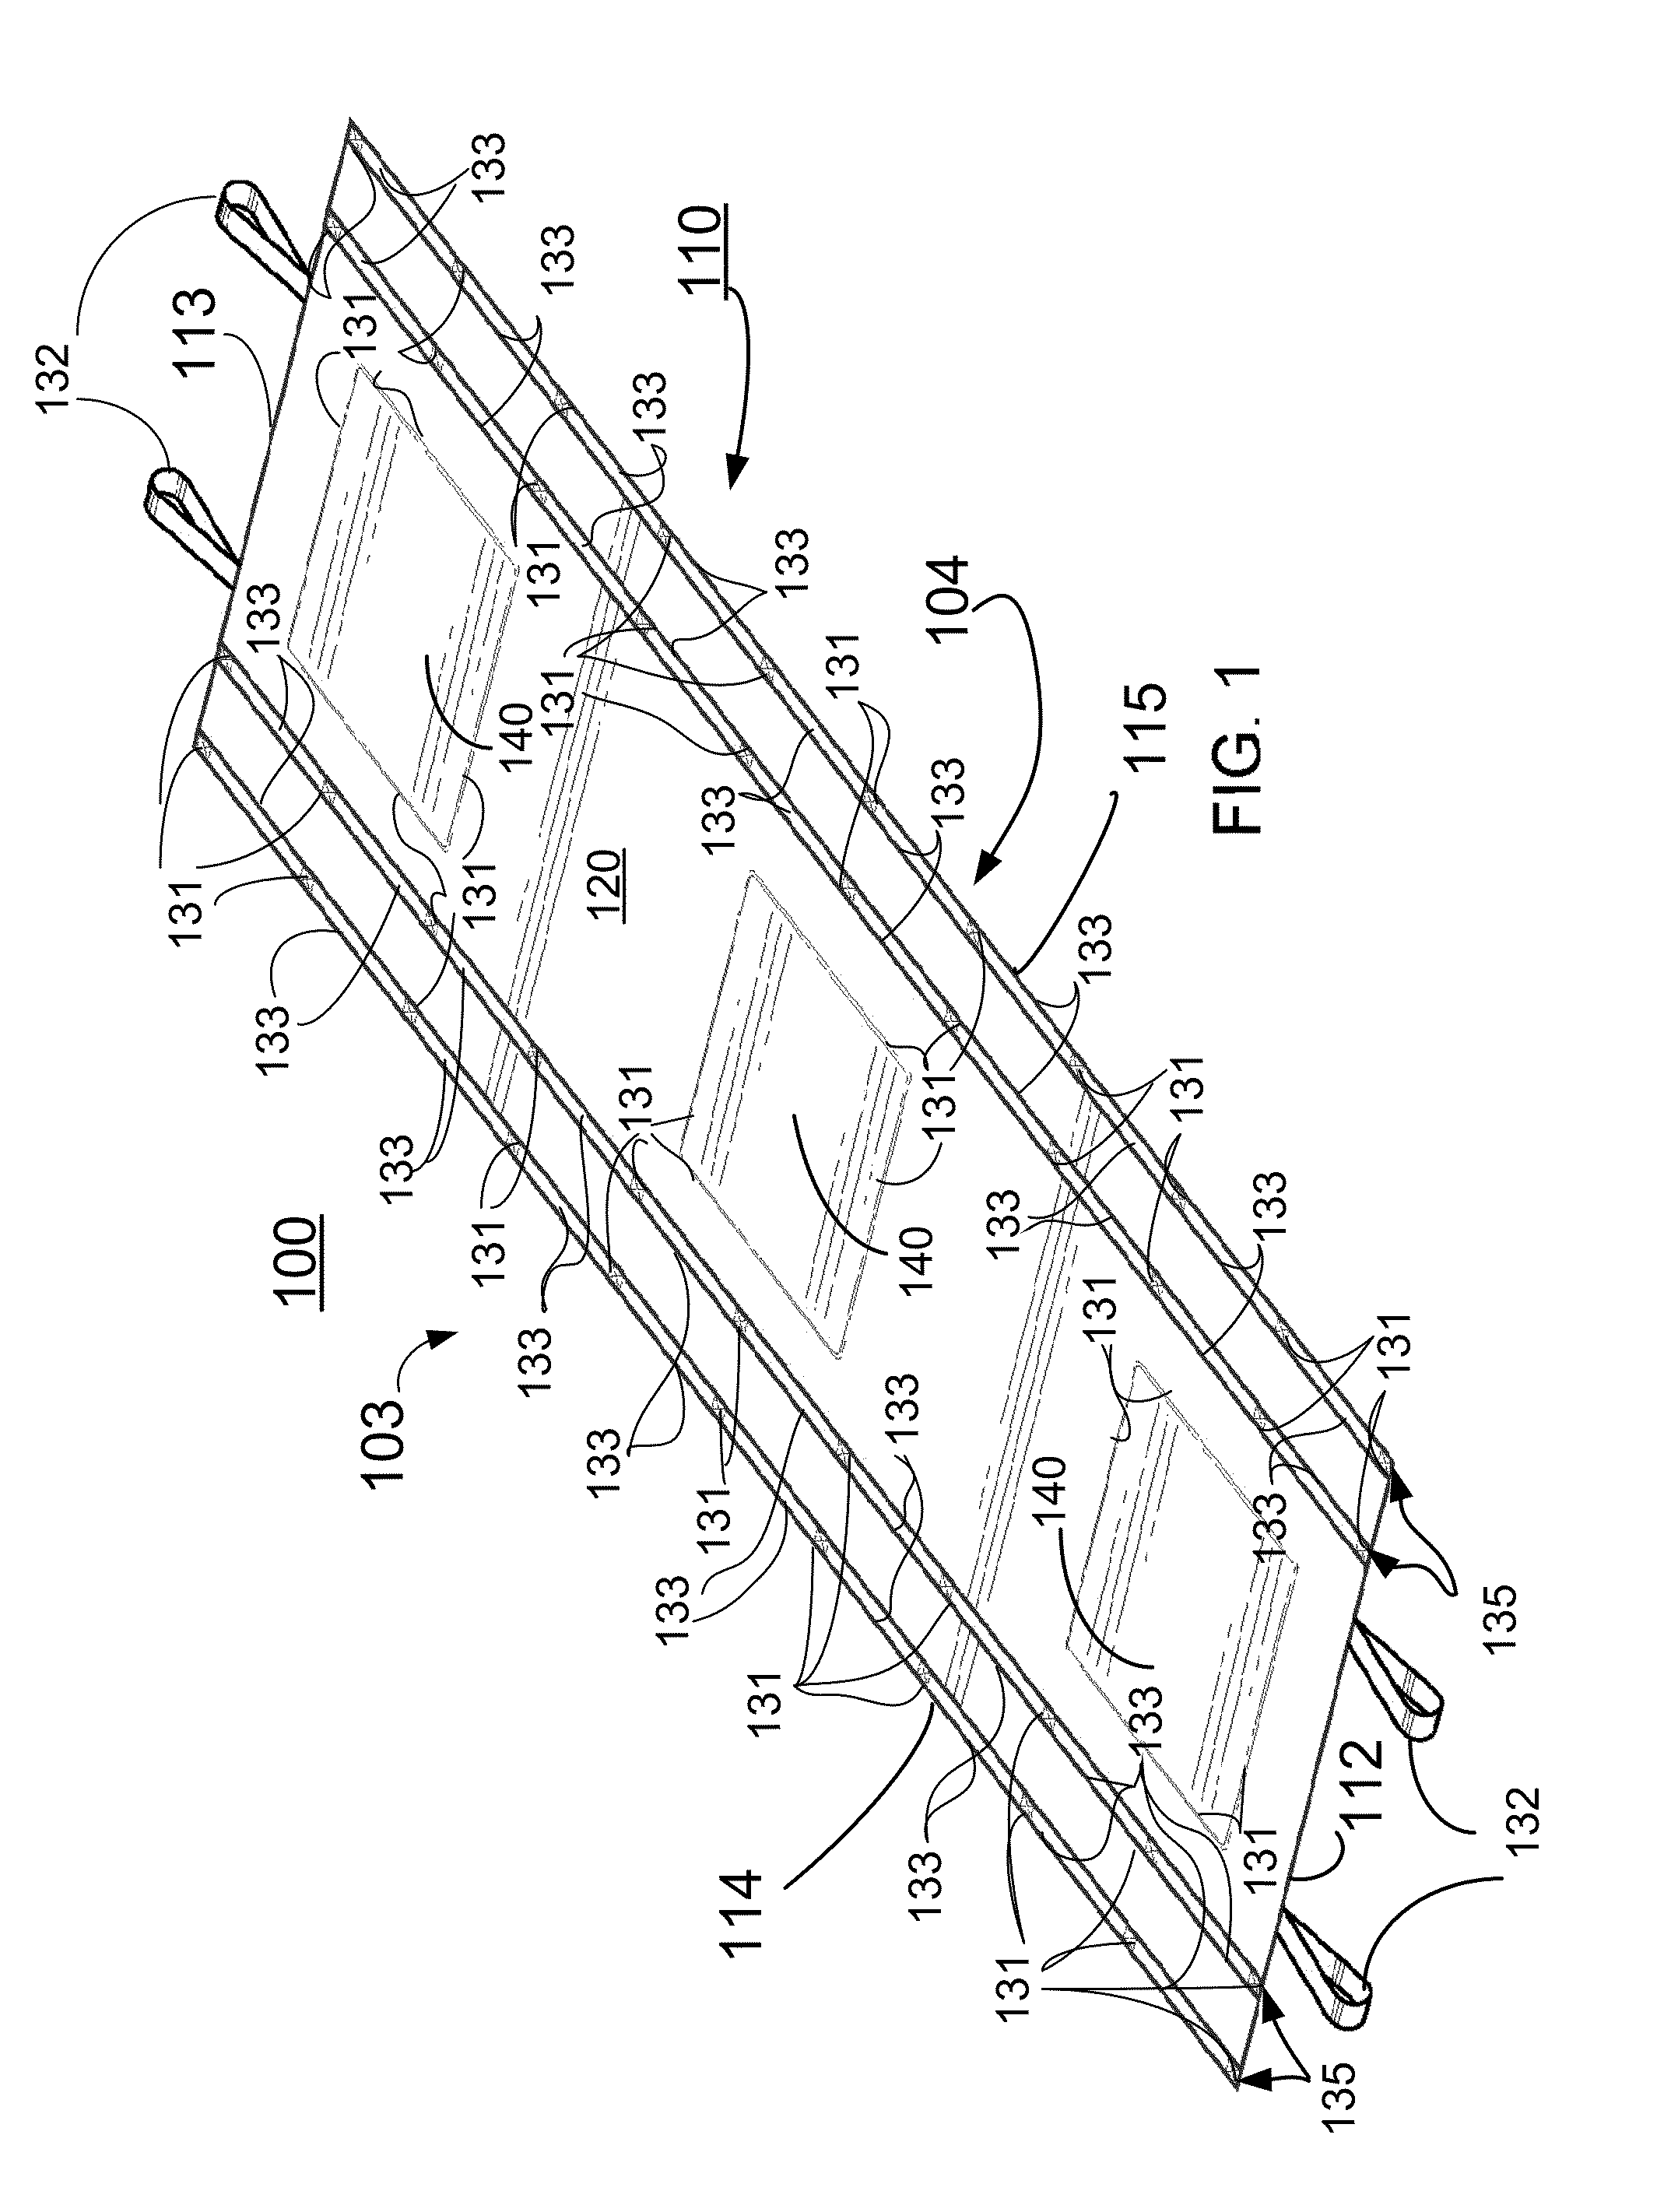 Apparatus, system and kit for rapidly moving a non-ambulatory person and/or object